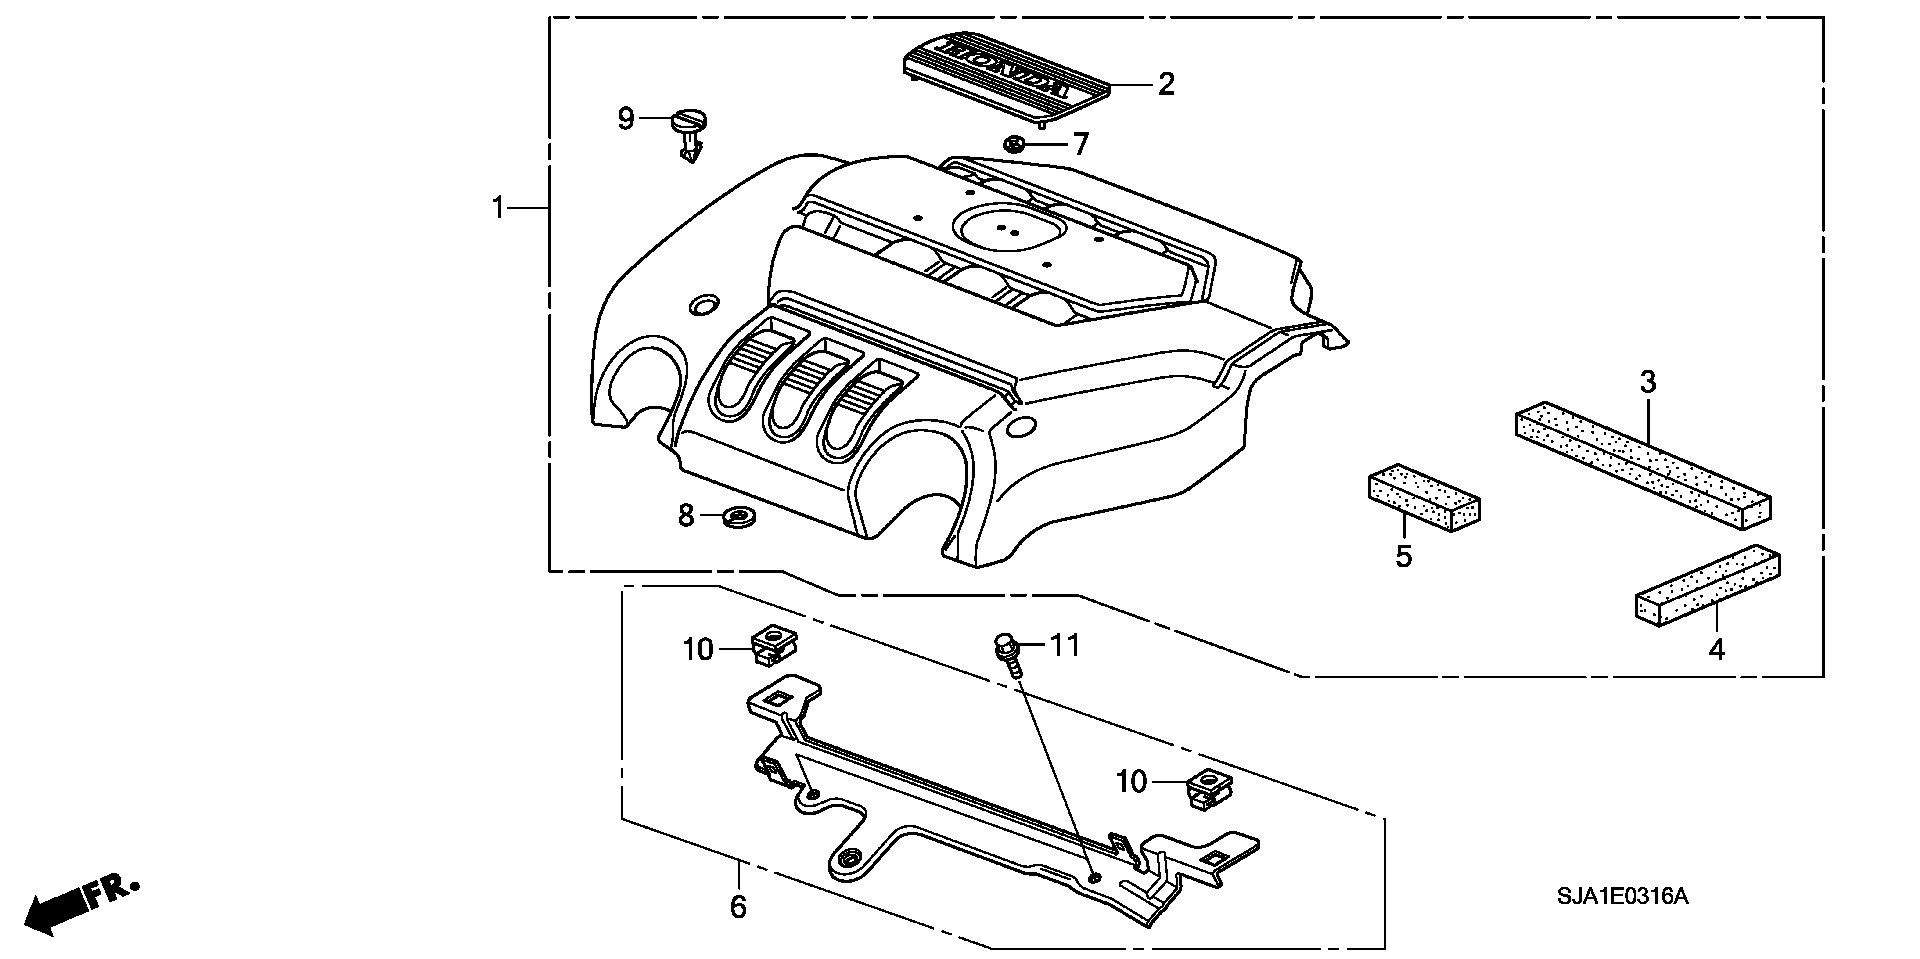 ENGINE COVER(2)